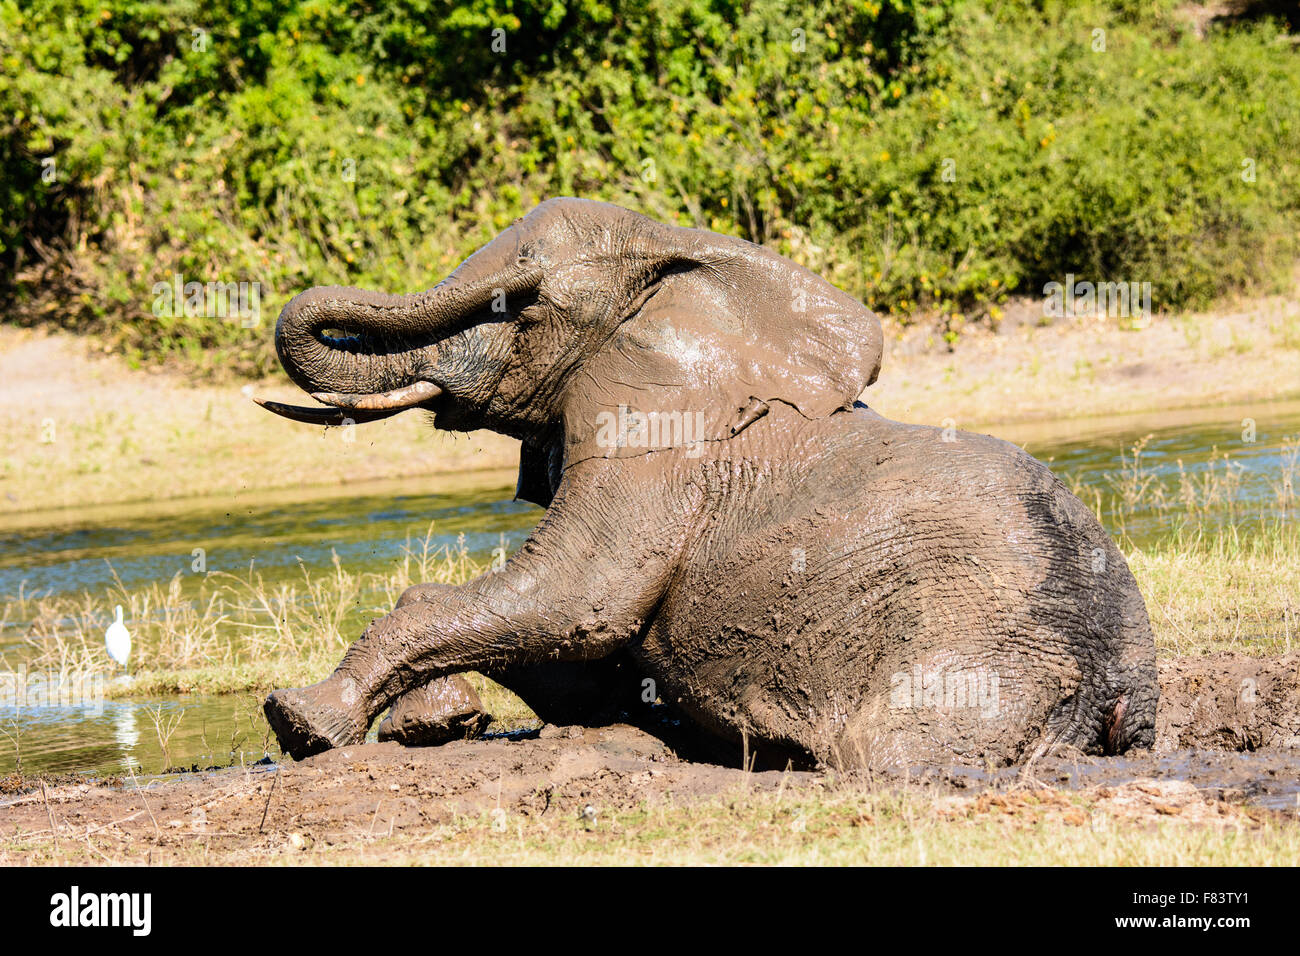 Elephant removing mud from its eye after a mud bath Stock Photo